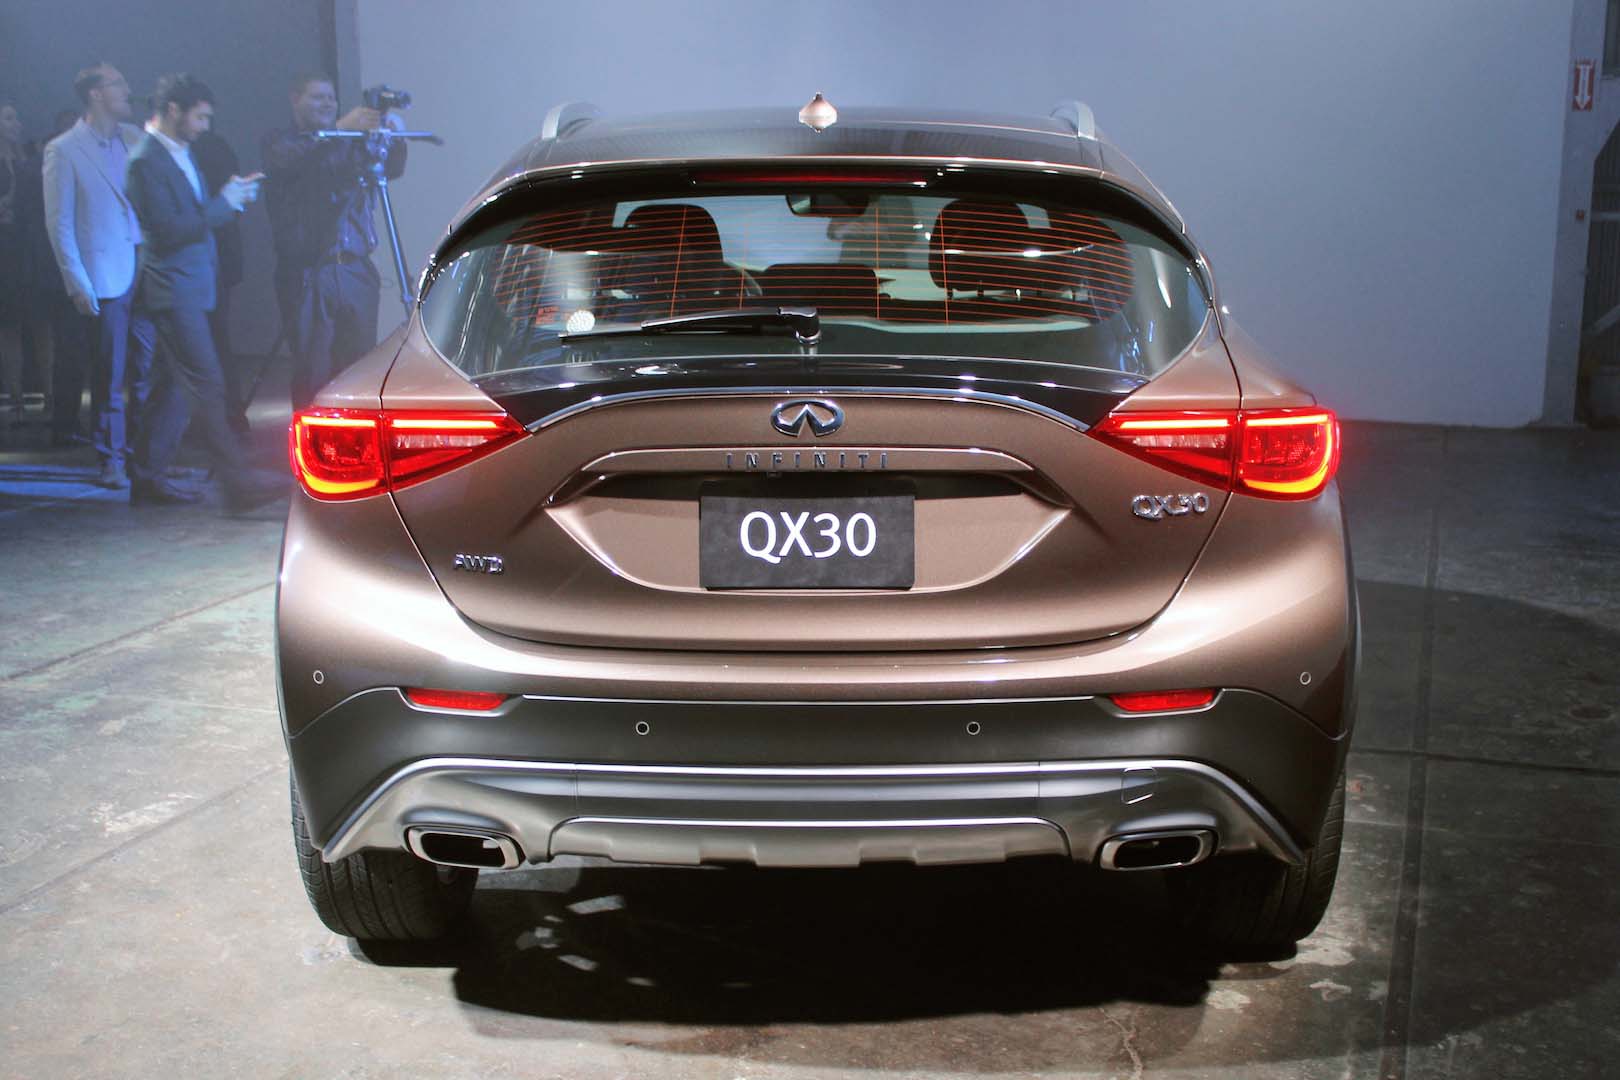 The QX30 benefits from Infiniti’s penchant for making unique-looking vehicles up and down the lineup; even the QX60, which is the one Infiniti model that deviates the least from its cousin in parent company Nissan’s stable – the Pathfinder – in the stylistic sense, has enough touches that clearly define it as an Infiniti.